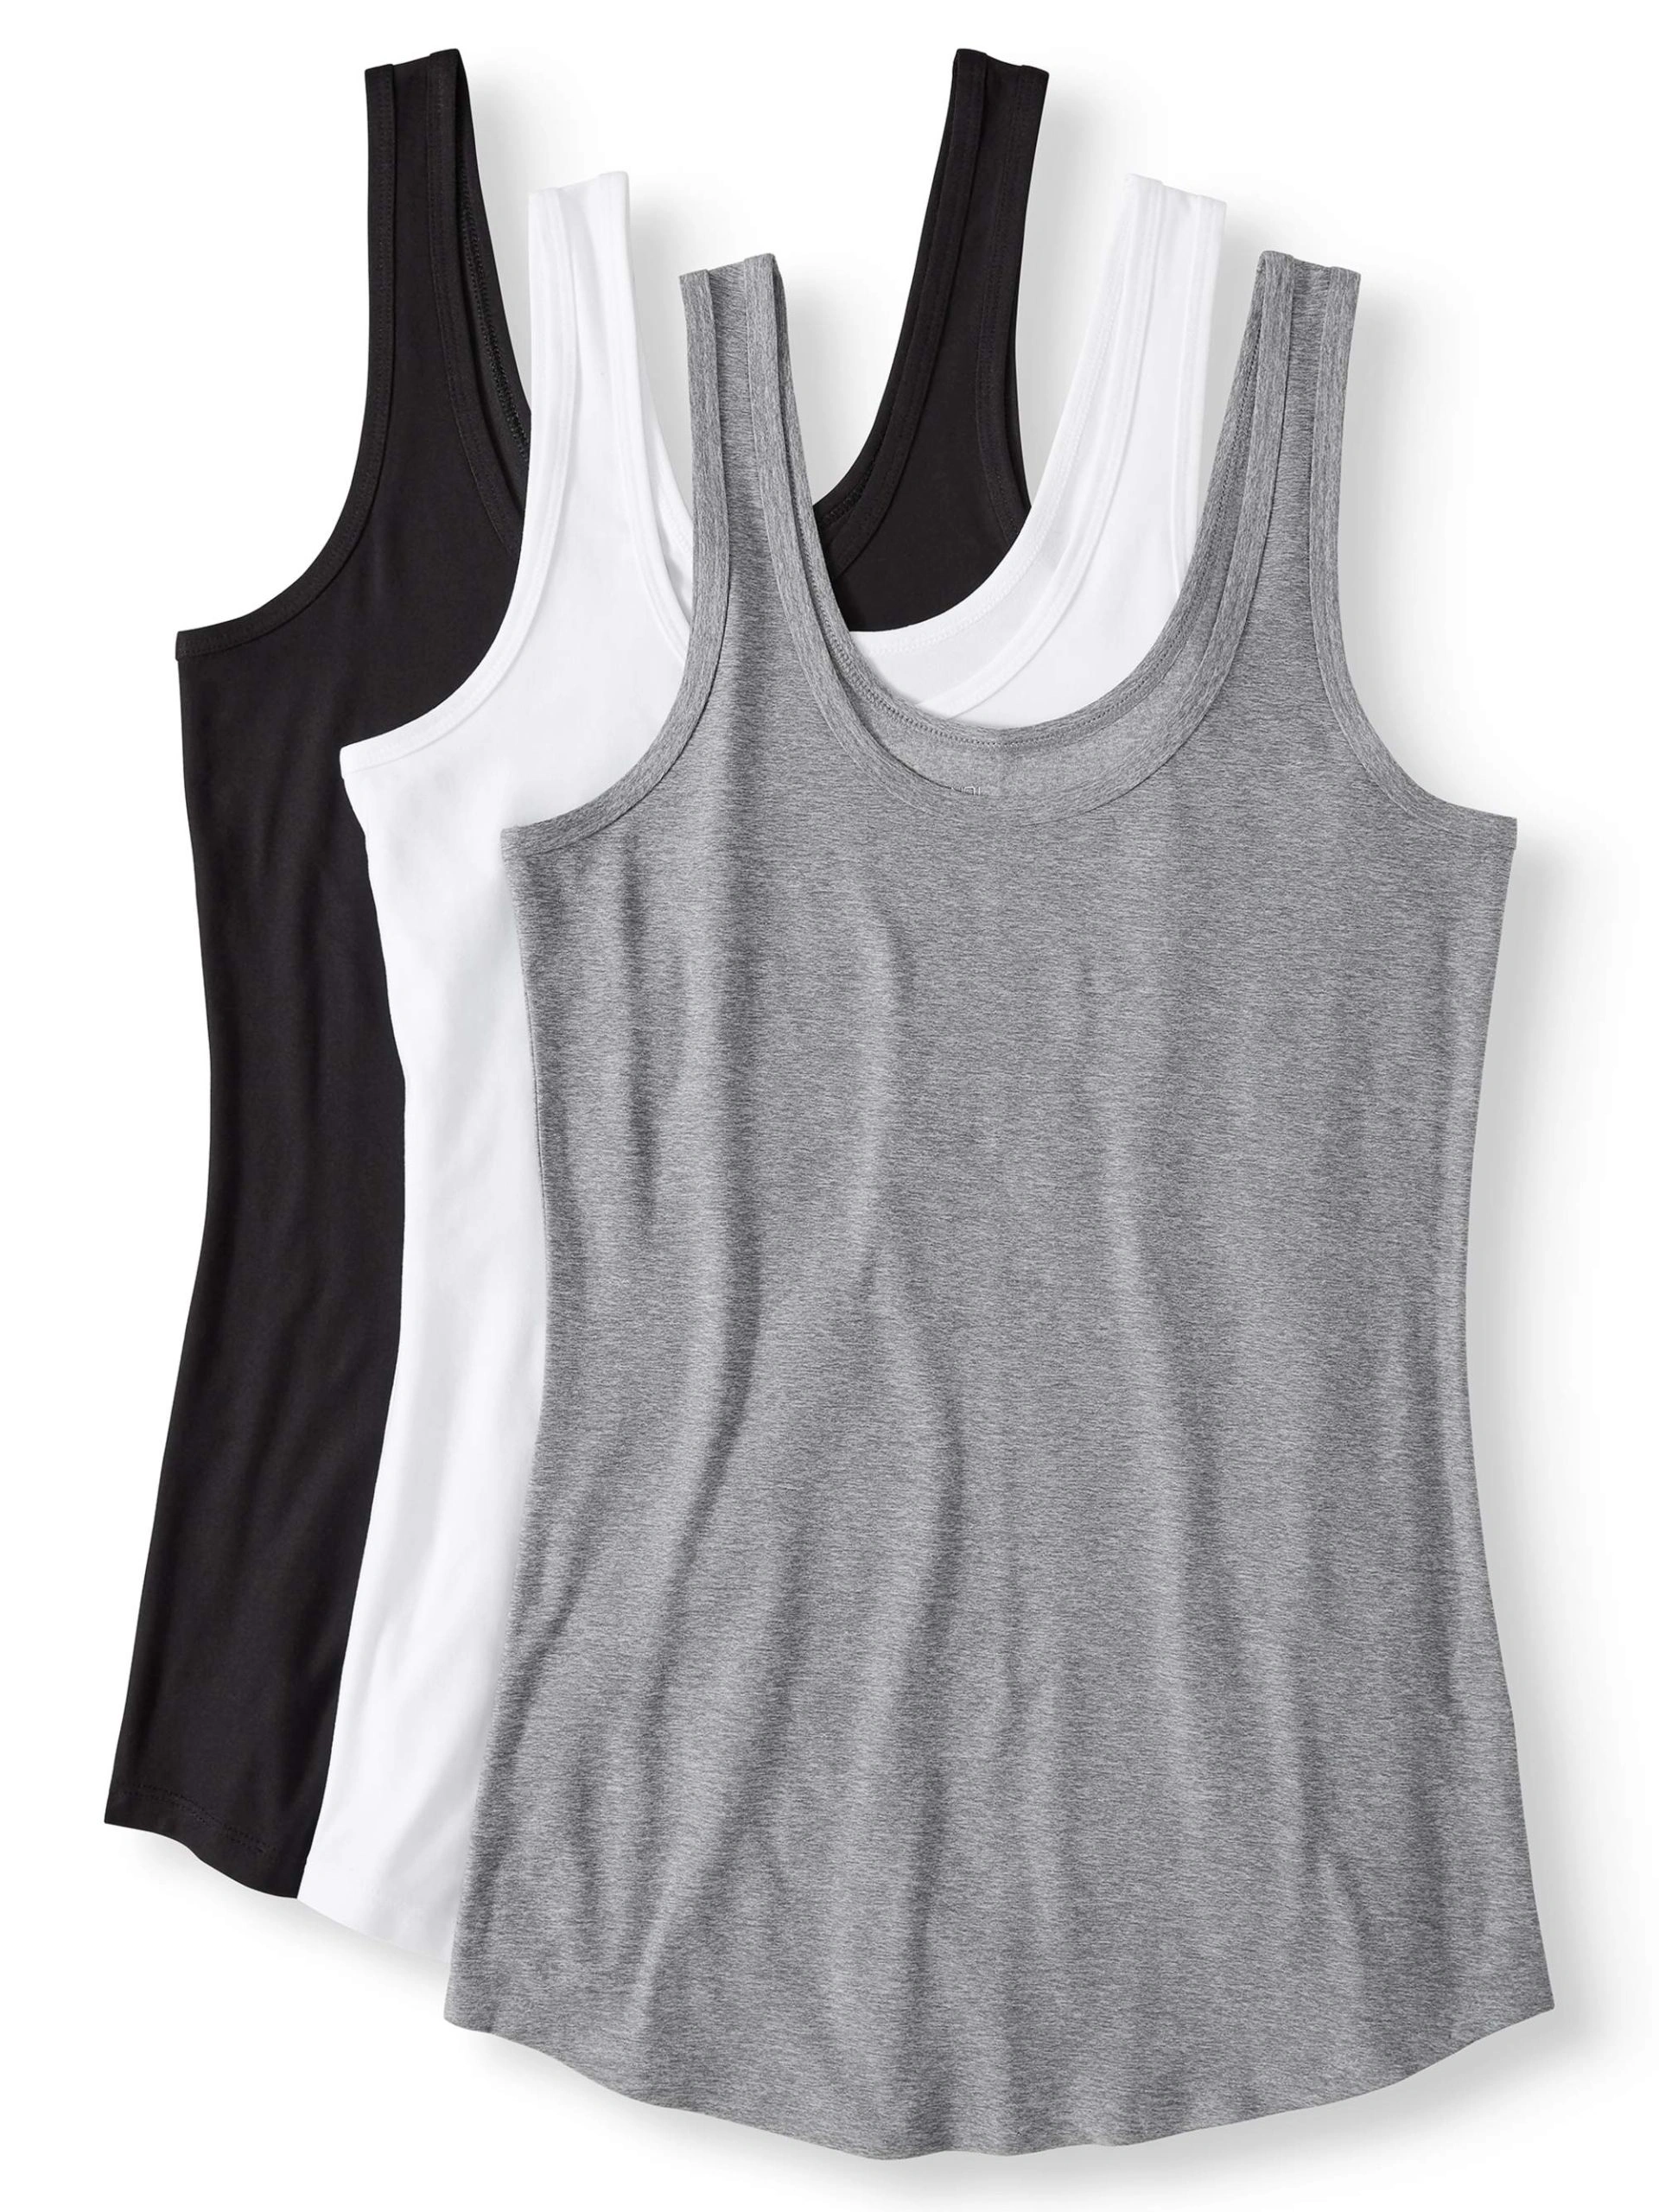 Wholesale Tank Tops Suppliers In Bangladesh